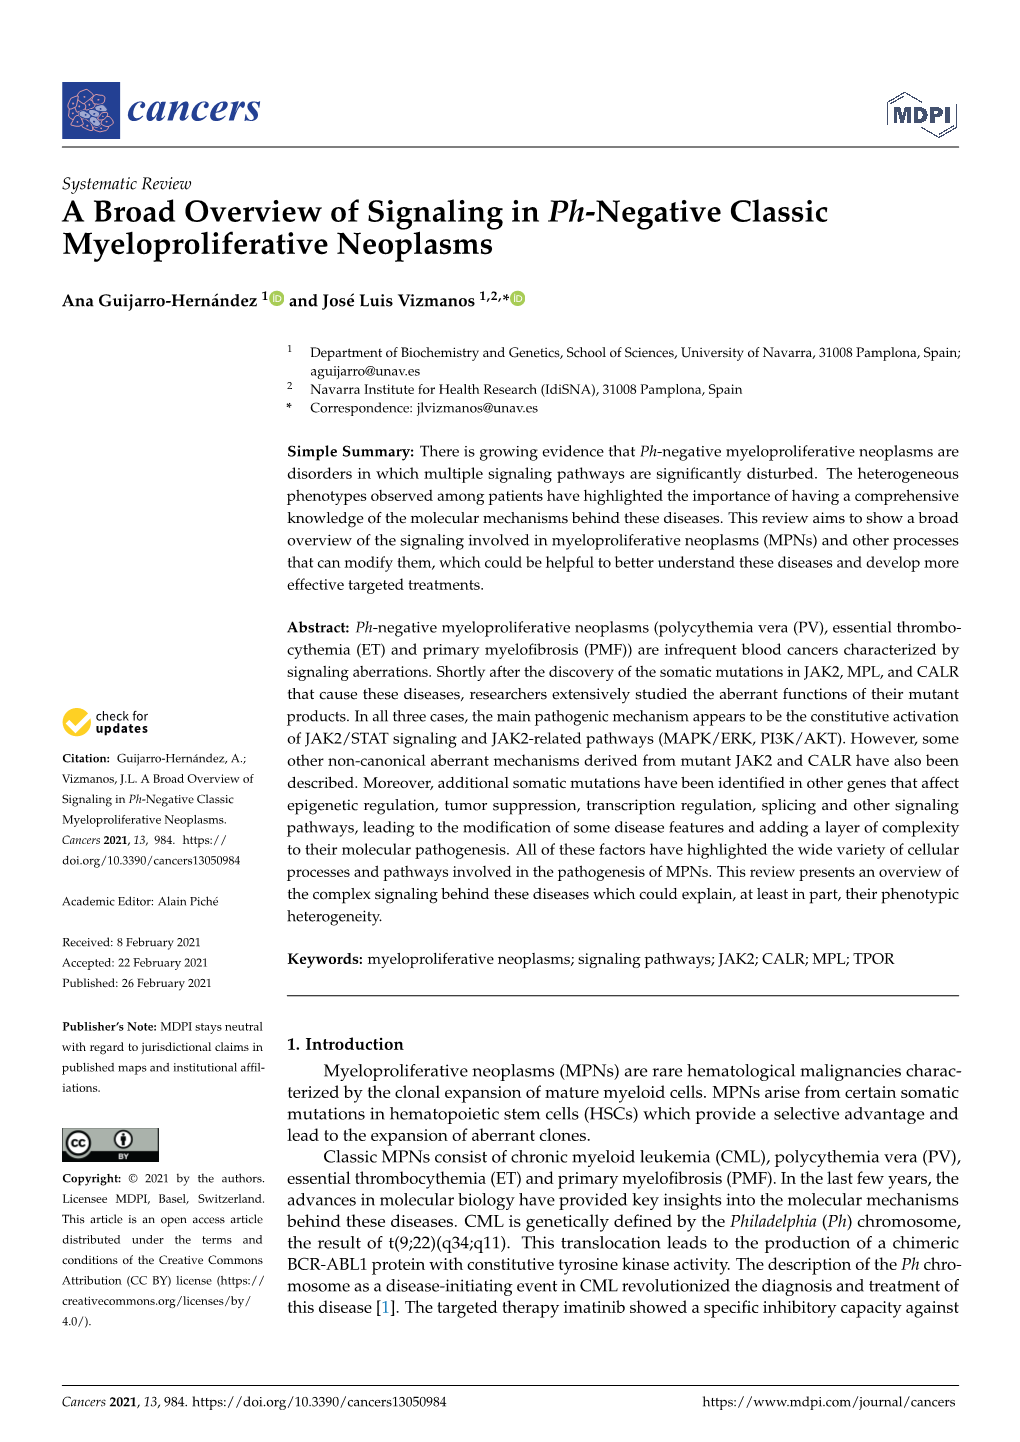 A Broad Overview of Signaling in Ph-Negative Classic Myeloproliferative Neoplasms